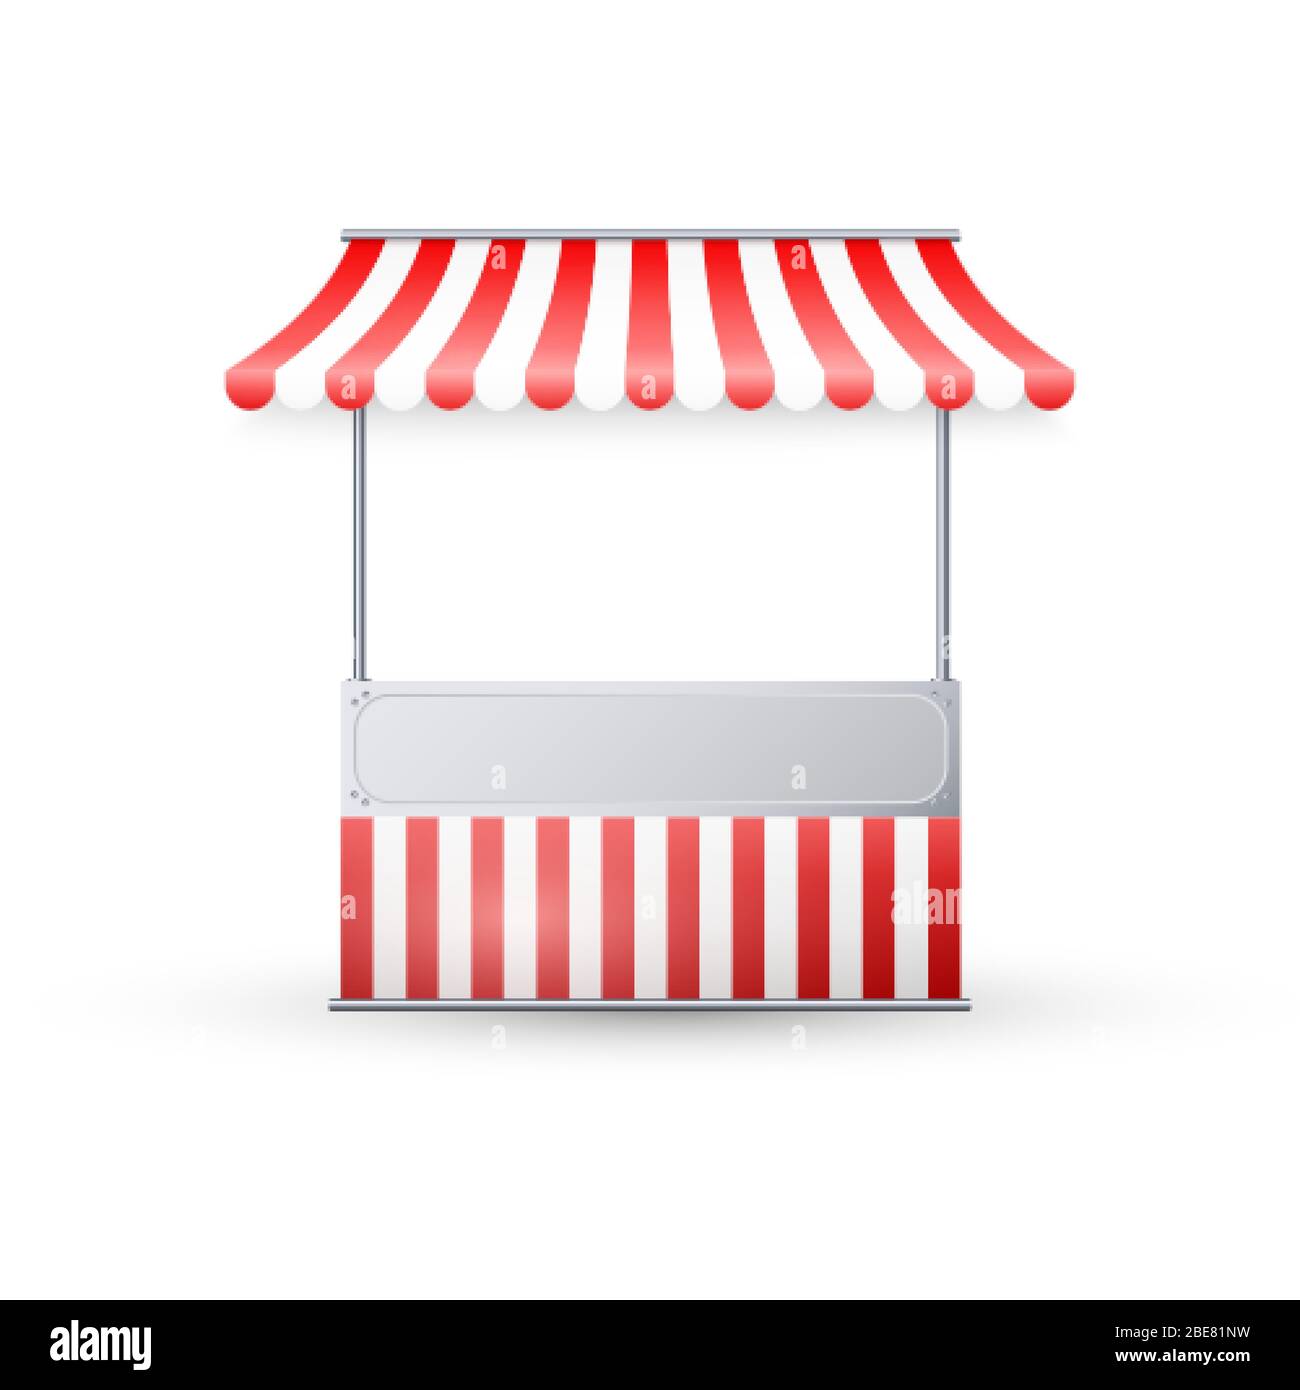 Realistic empty market stall with red and white striped awning. Template street trading, retail stand for grocery goods. Vector illustration Stock Vector